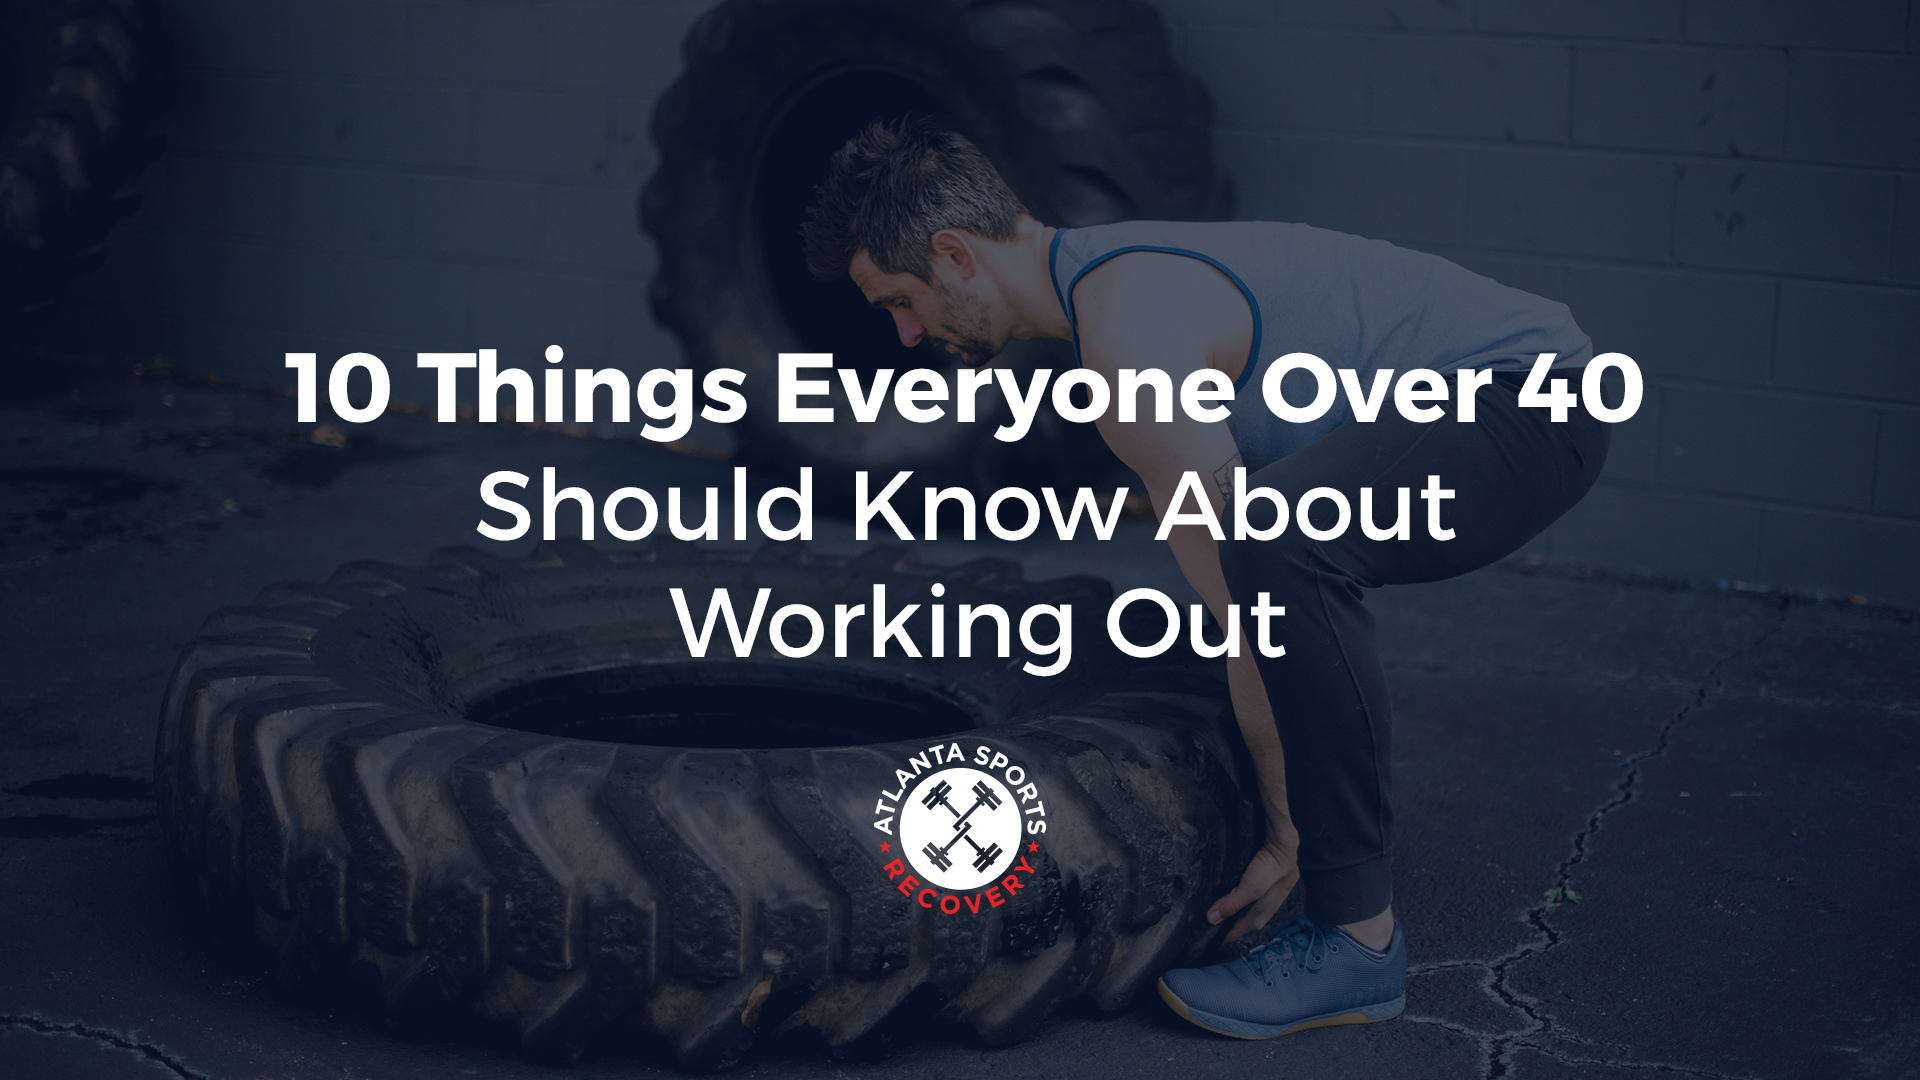 10 Things Everyone Over 40 Should Know About Working Out